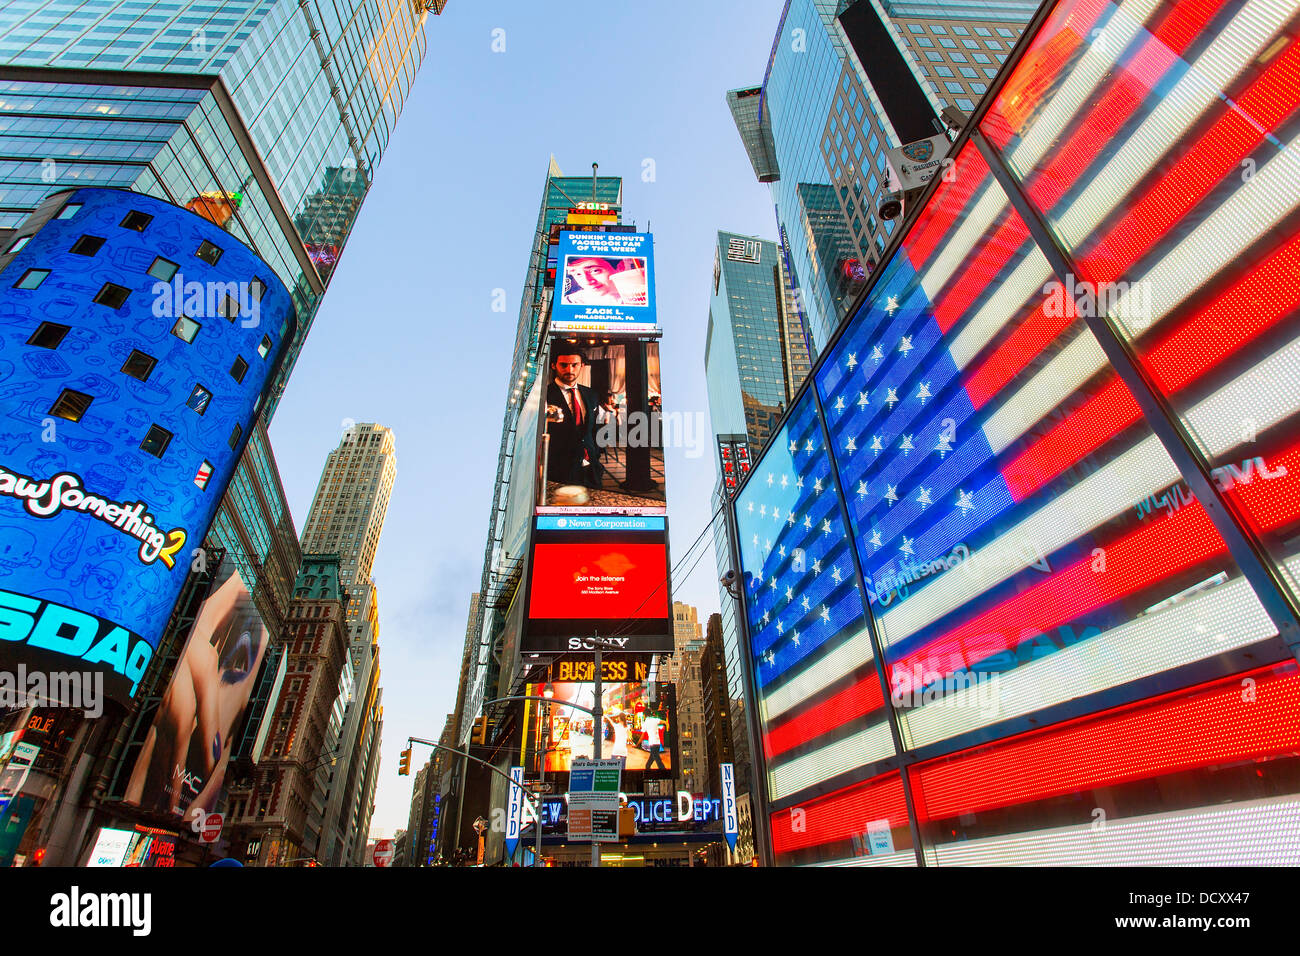 New York City Times Square Banque D'Images